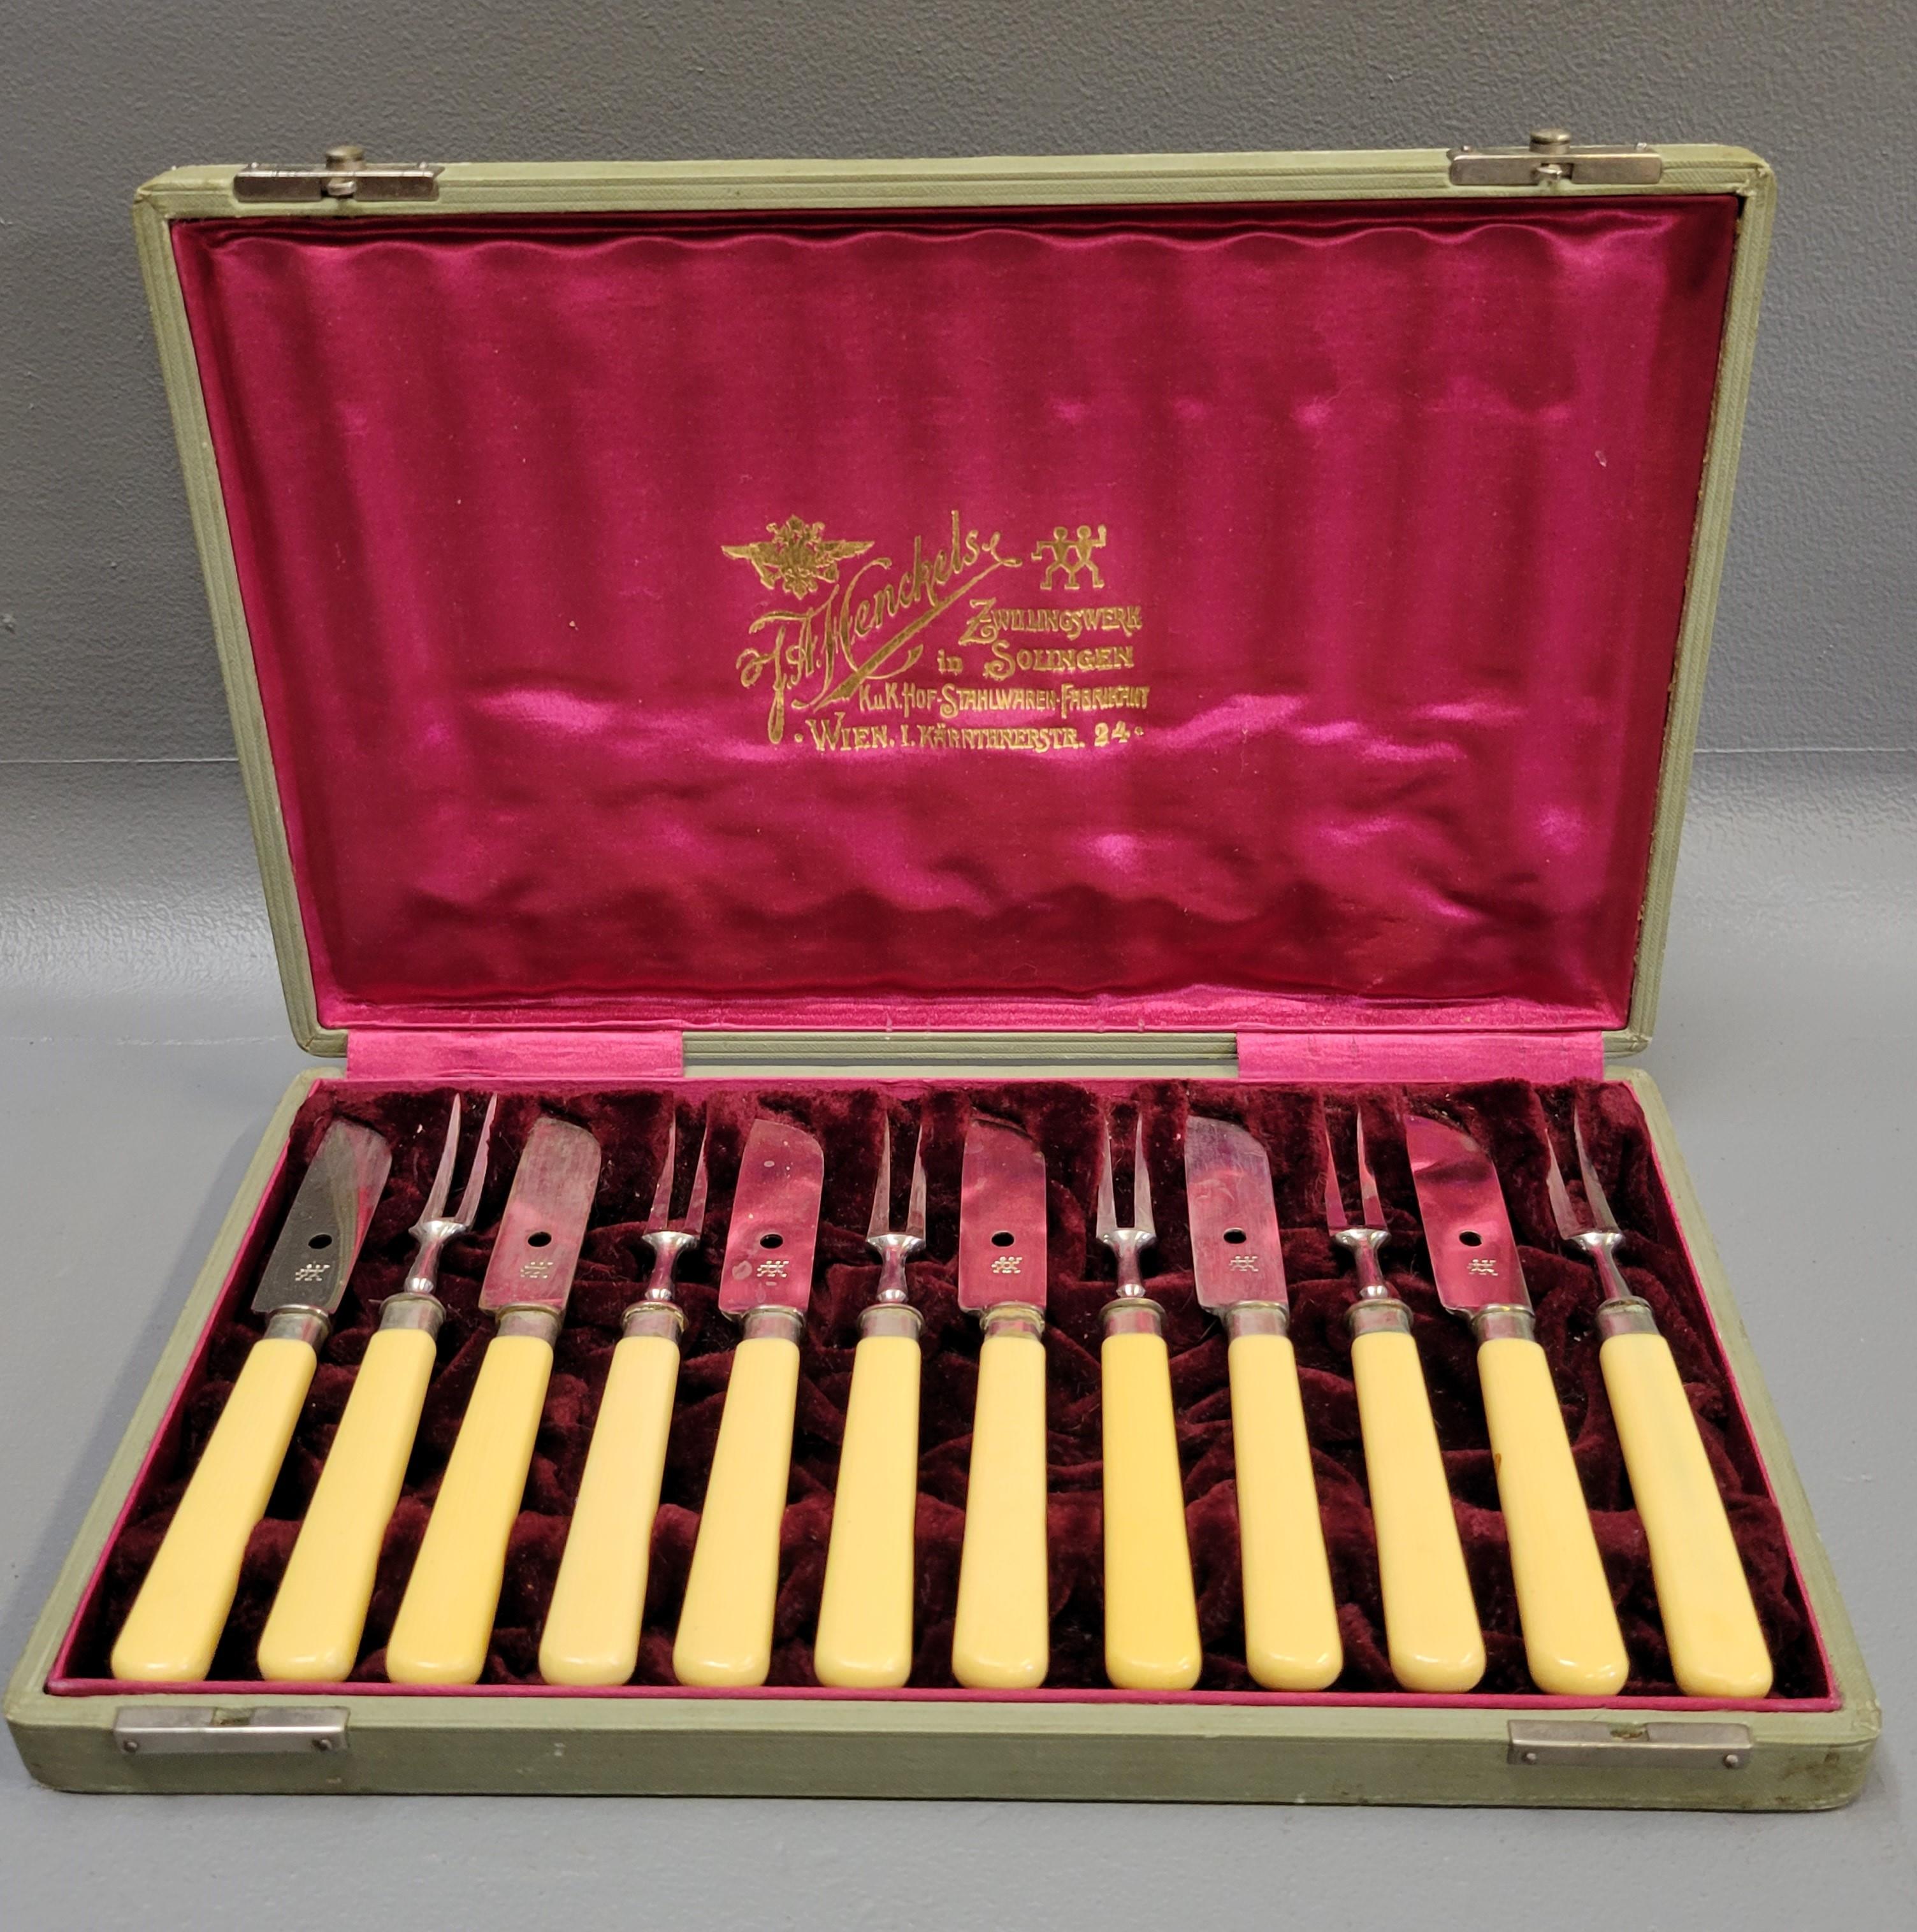 This vintage 1920s J.A. Henckels cocktail set in its original presentation box would make a lovely and unique hostess or wedding present. Blades and forks made of stainless steel; handles made of bakelite. Box is intact. 
Complete set in its